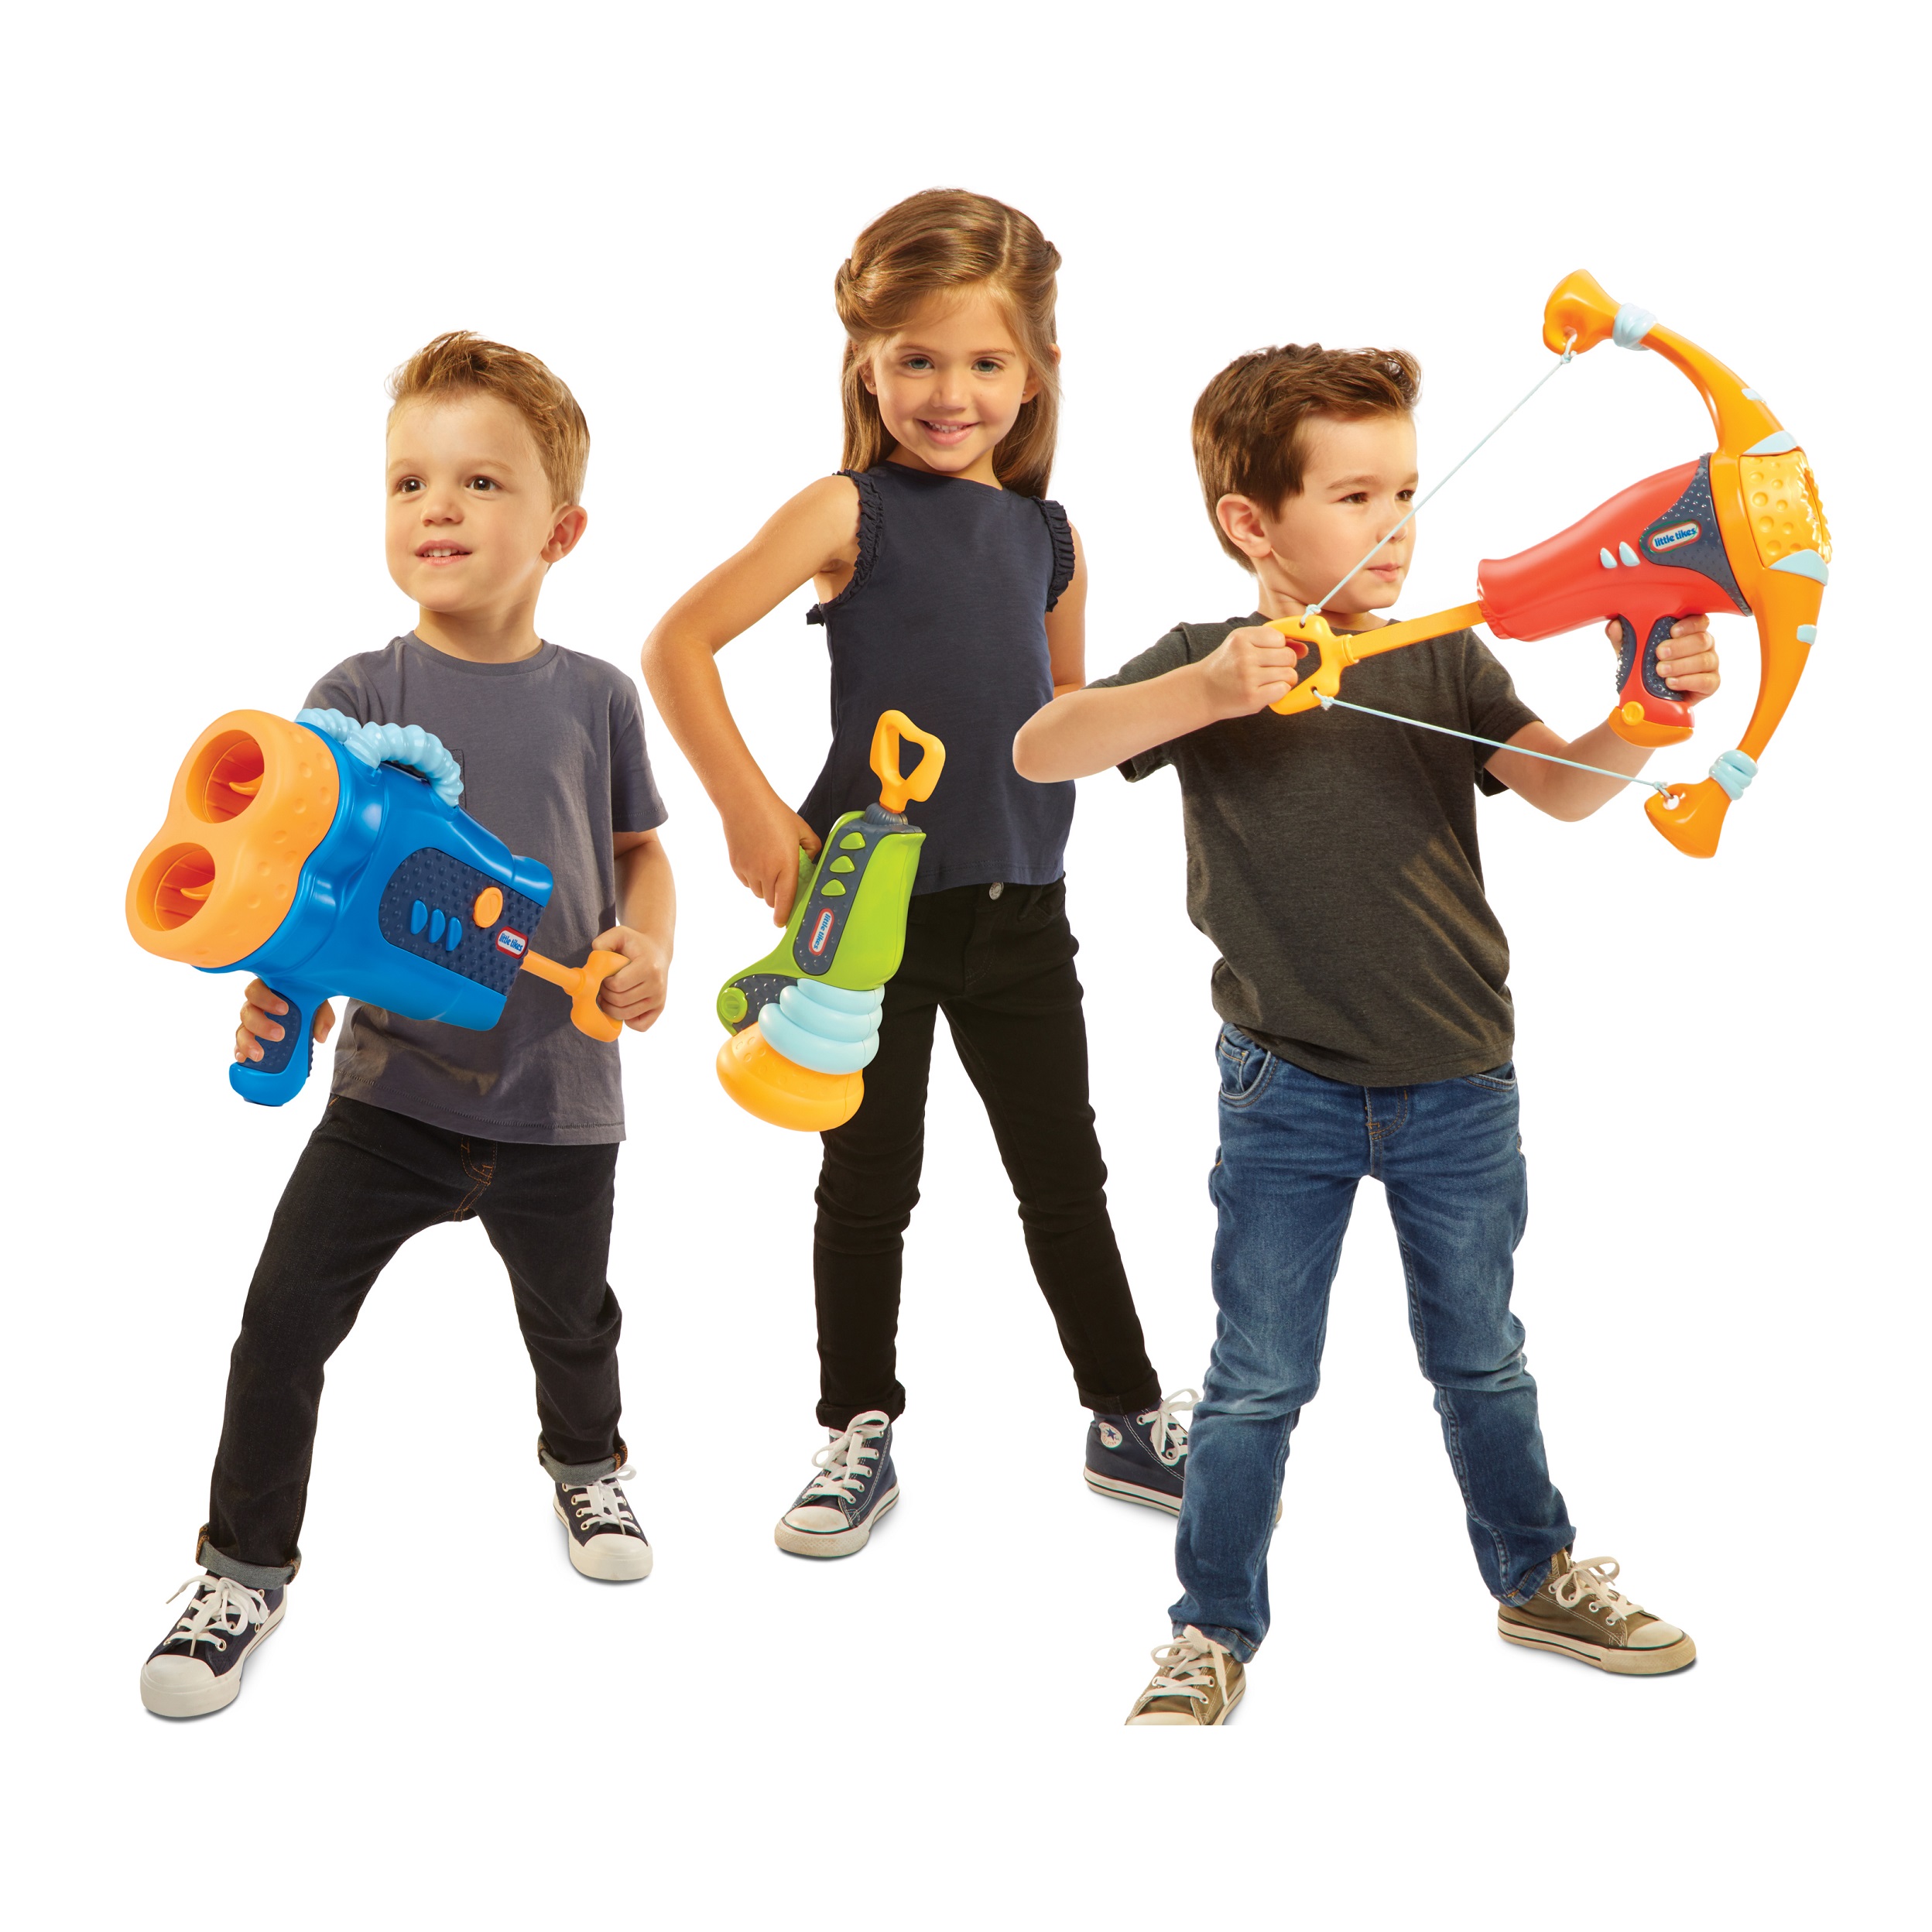 Little Tikes 651250 Mighty Blasters Boom Blaster Toy Blaster with 3 Soft Power Pods - image 5 of 6